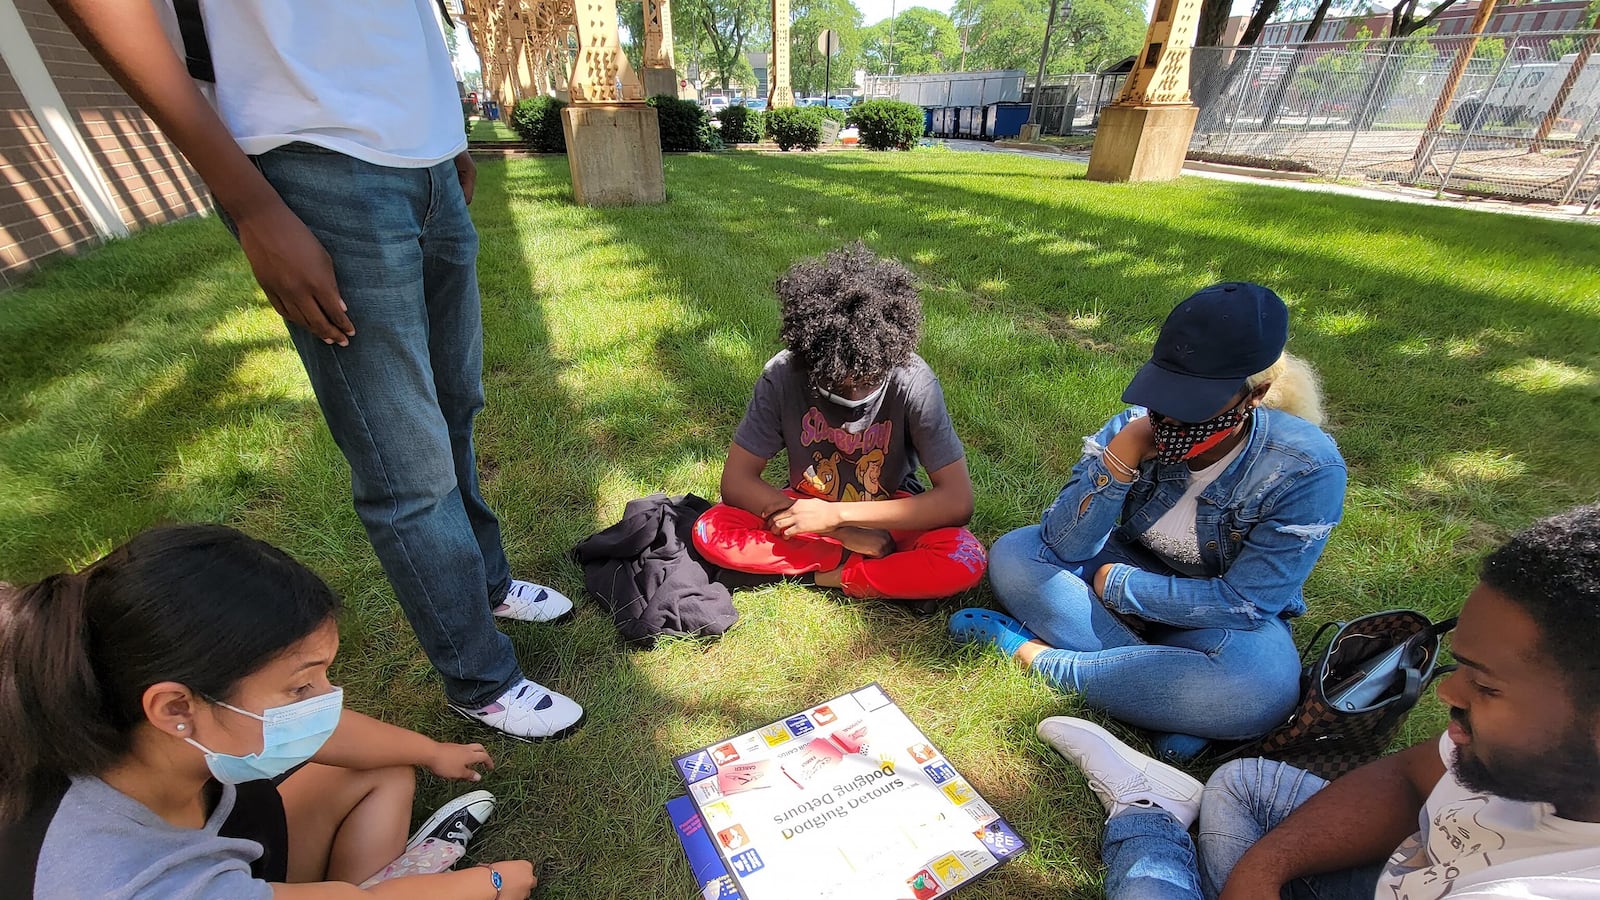 Students sit and play a board game outdoors, each wearing protective masks